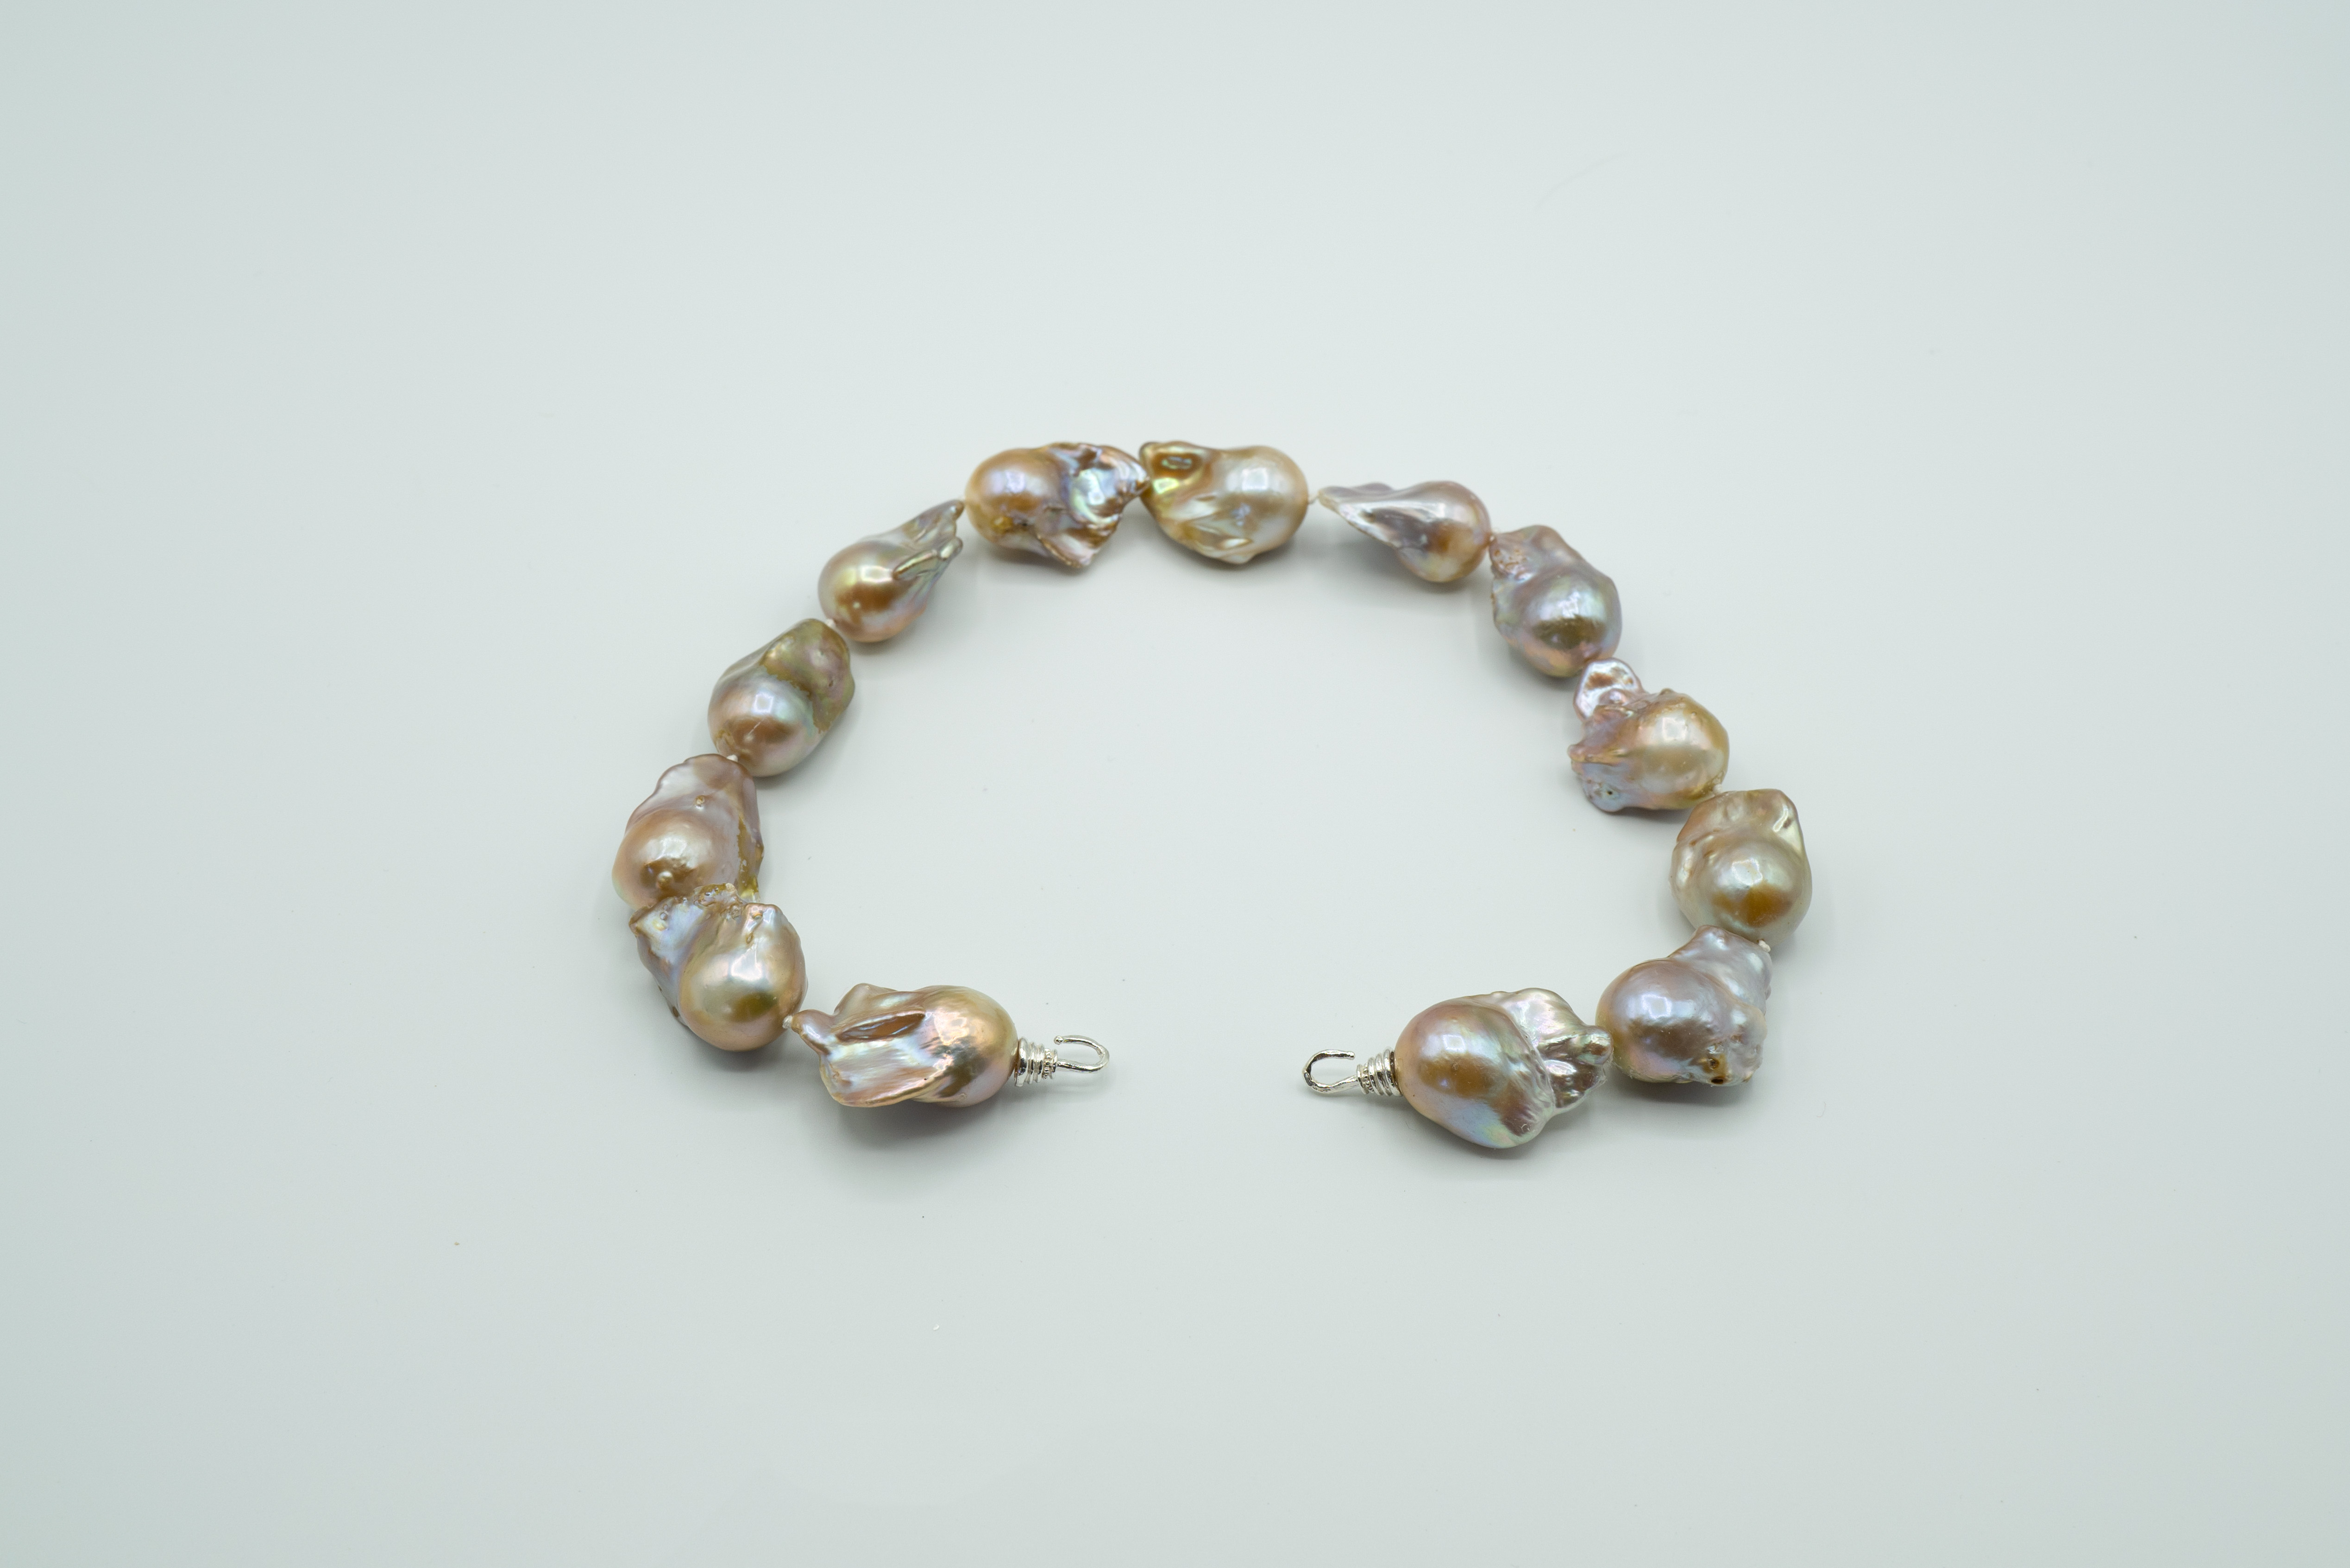 Natural VERY Baroque Kettle Shape Bronzey 20-25mm Pearls on Sterling